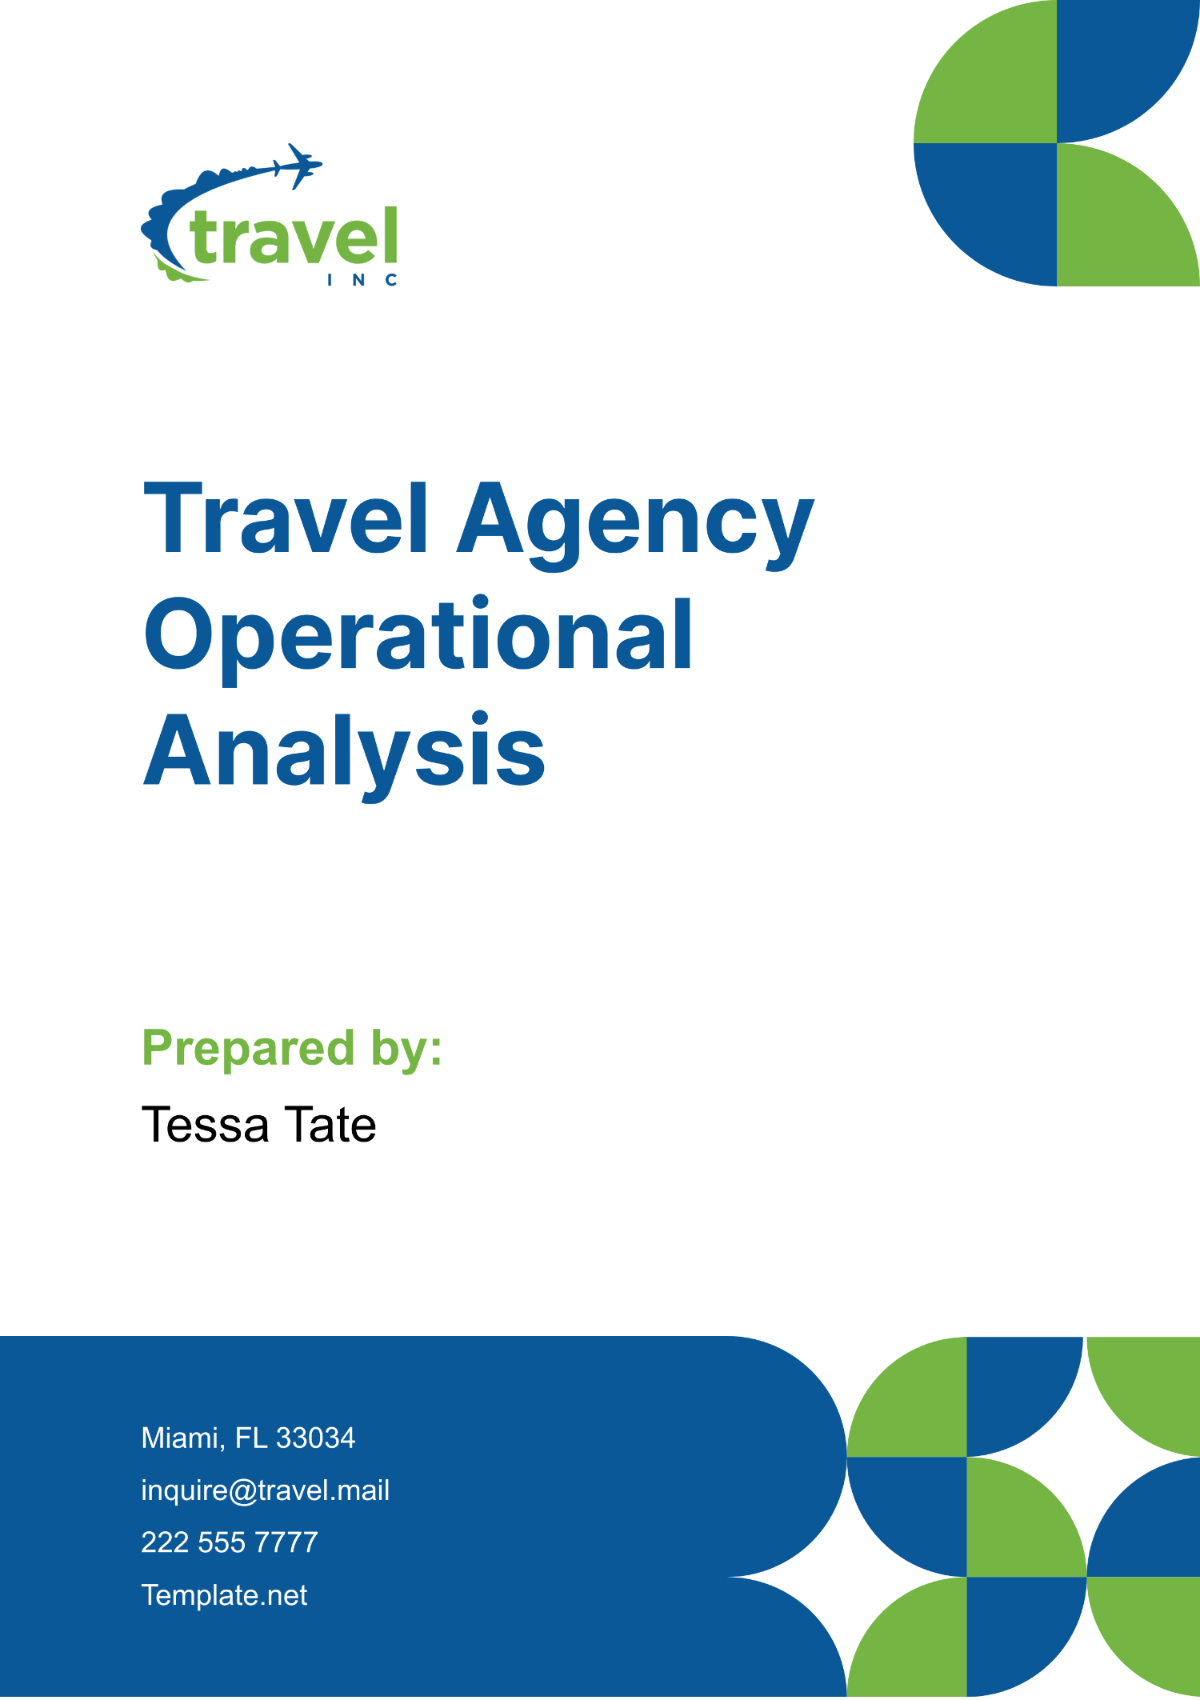 Travel Agency Operational Analysis Template